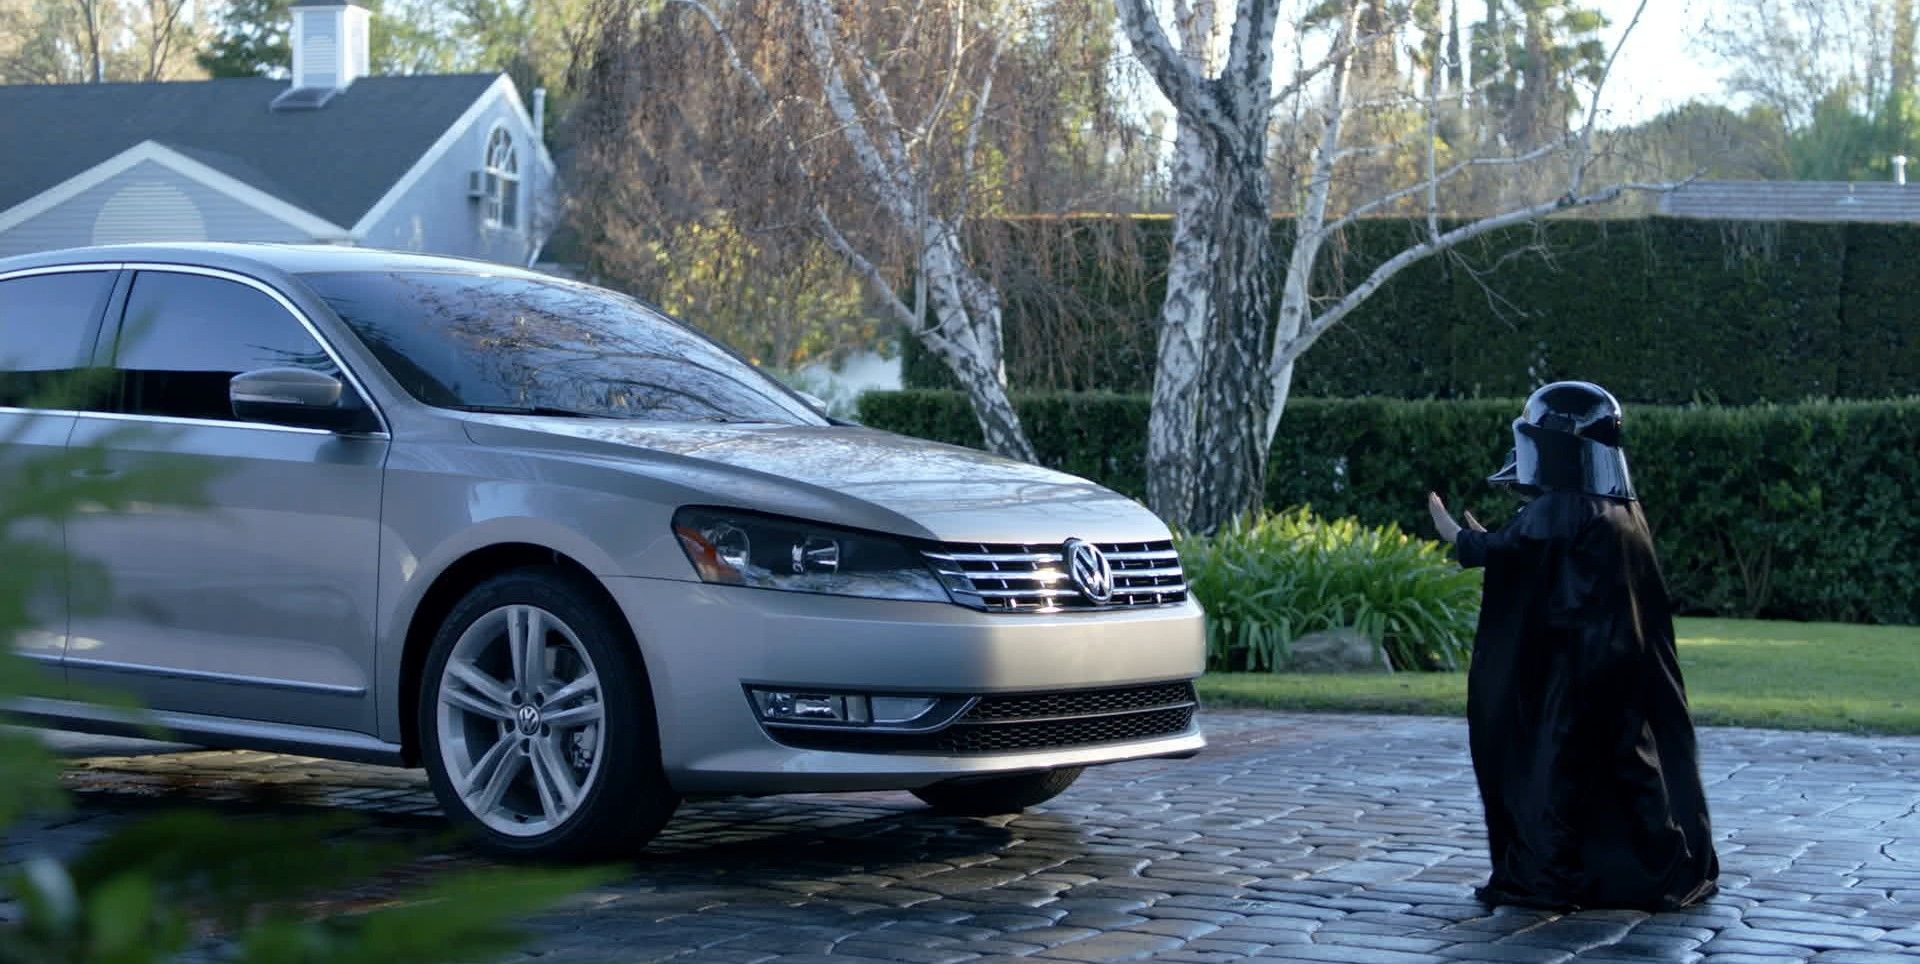 15 Of The Greatest Super Bowl Car Commercials Of All Time